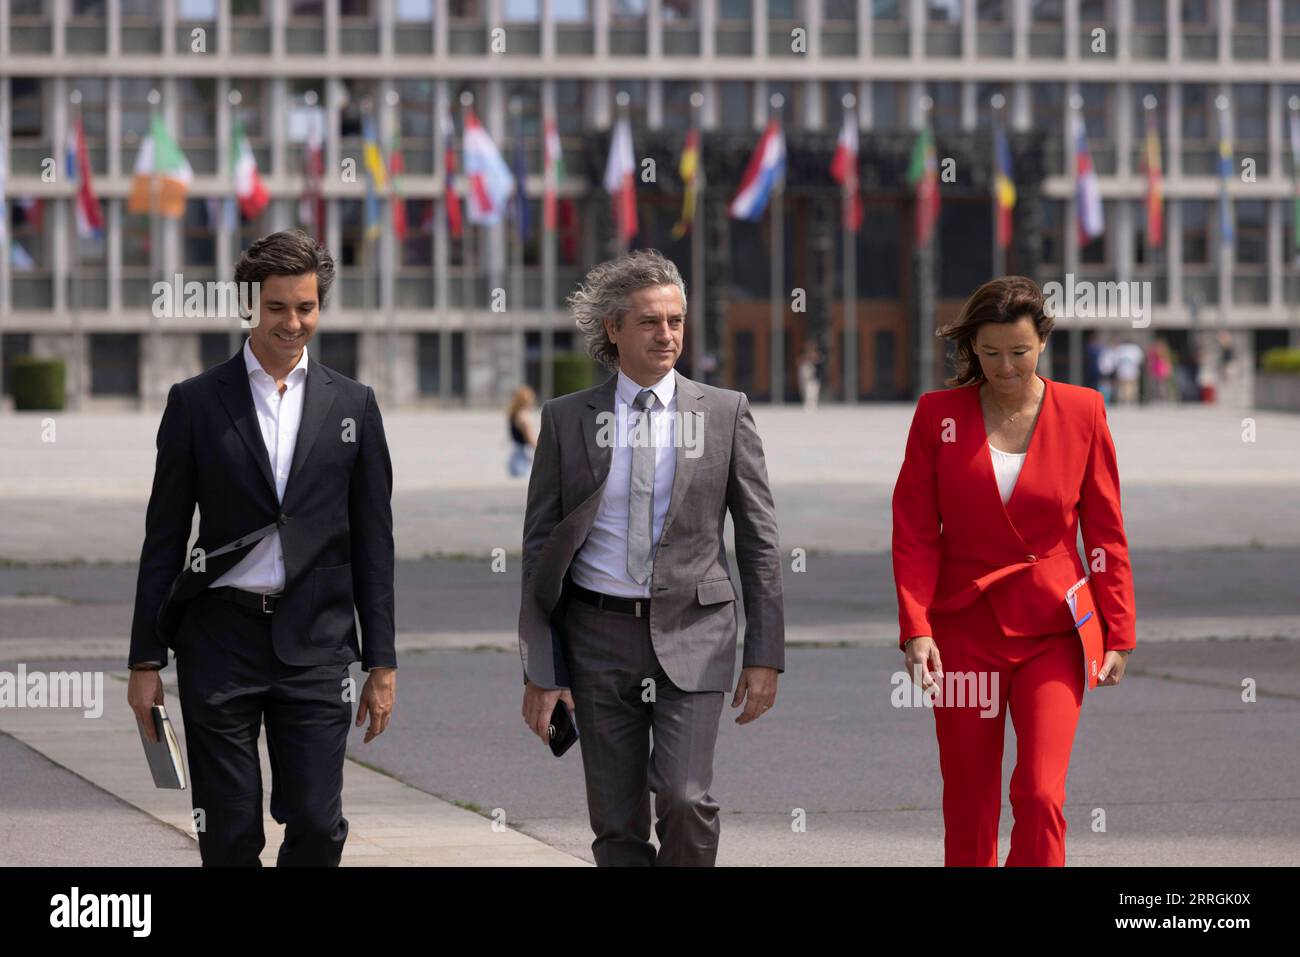 220525 -- LJUBLJANA, May 25, 2022 -- Robert Golob C, leader of the Freedom Movement, Tanja Fajon R, leader of the Social Democrats, and Luka Mesec, leader of the Left, walk in front of the National Assembly Building of Slovenia after signing a coalition agreement in Ljubljana, Slovenia, May 24, 2022. Three Slovenian center-left parties signed a coalition agreement, paving the way for a leftward policy shift, on Tuesday. The move comes a day before parliament is due to confirm leader of the Freedom Movement FM Robert Golob as the country s new prime minister, following the April 24 general elec Stock Photo